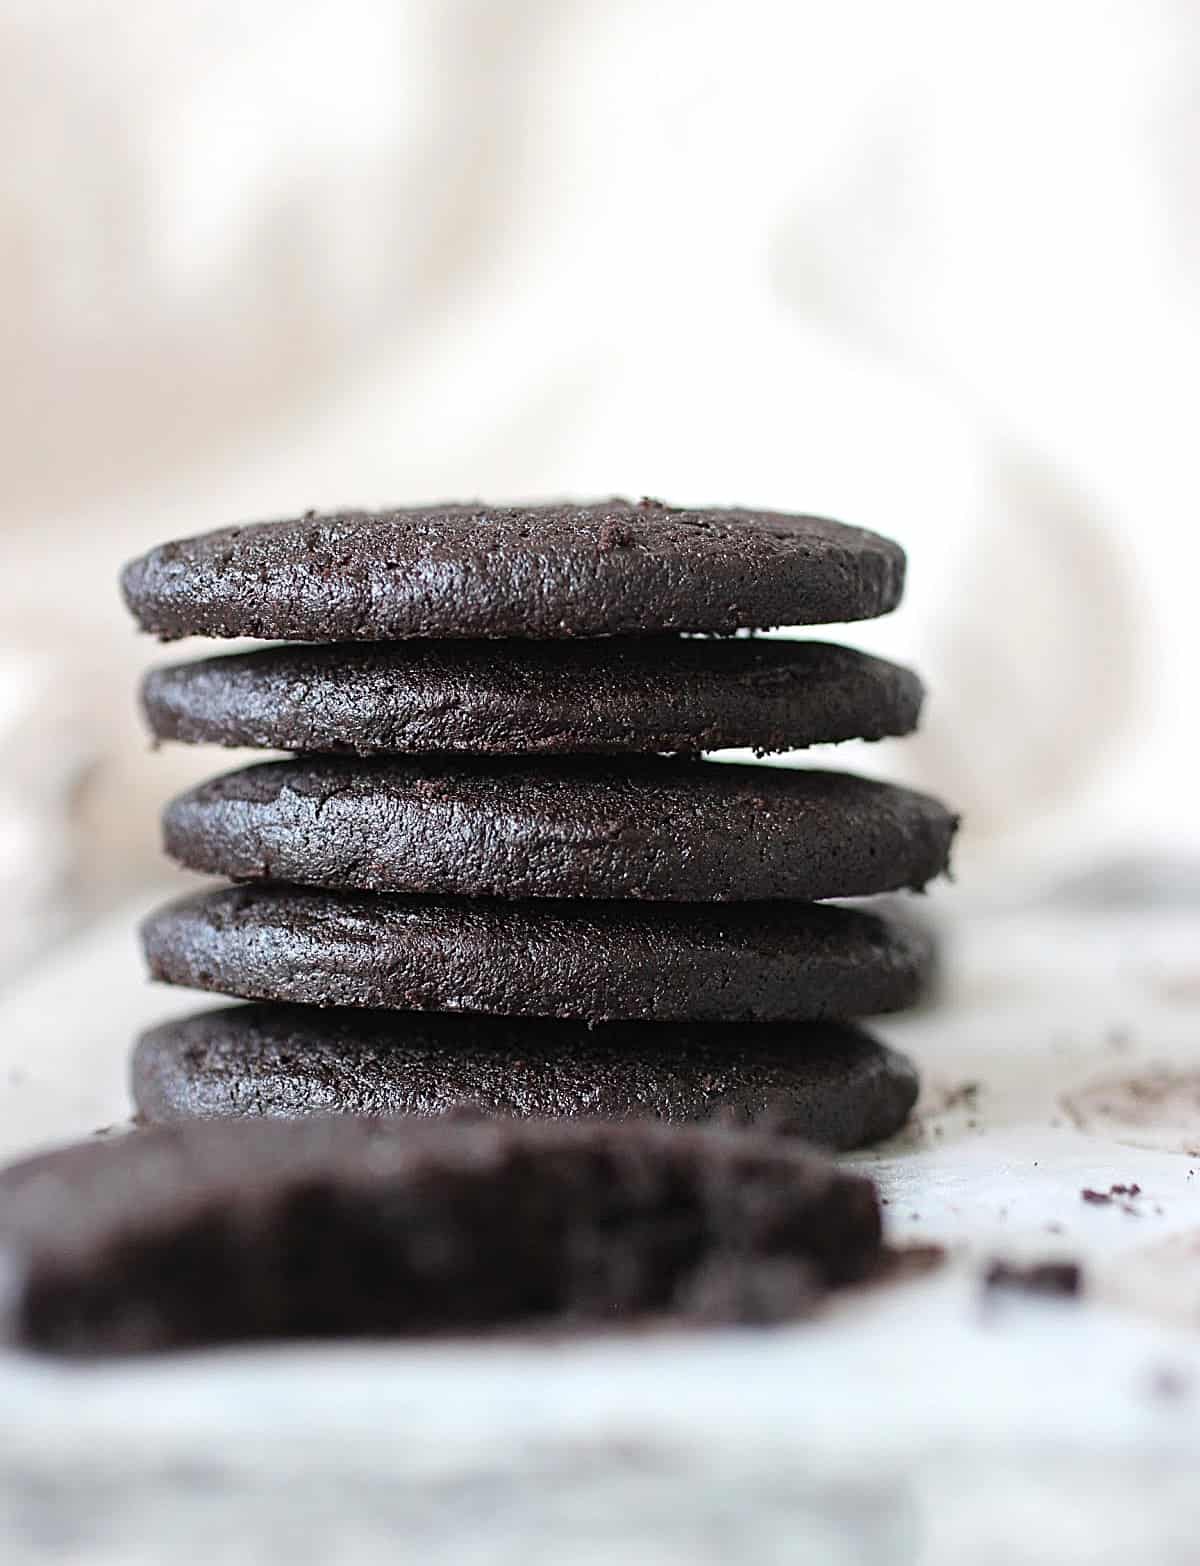 Stack of several chocolate cookie rounds, light colored background